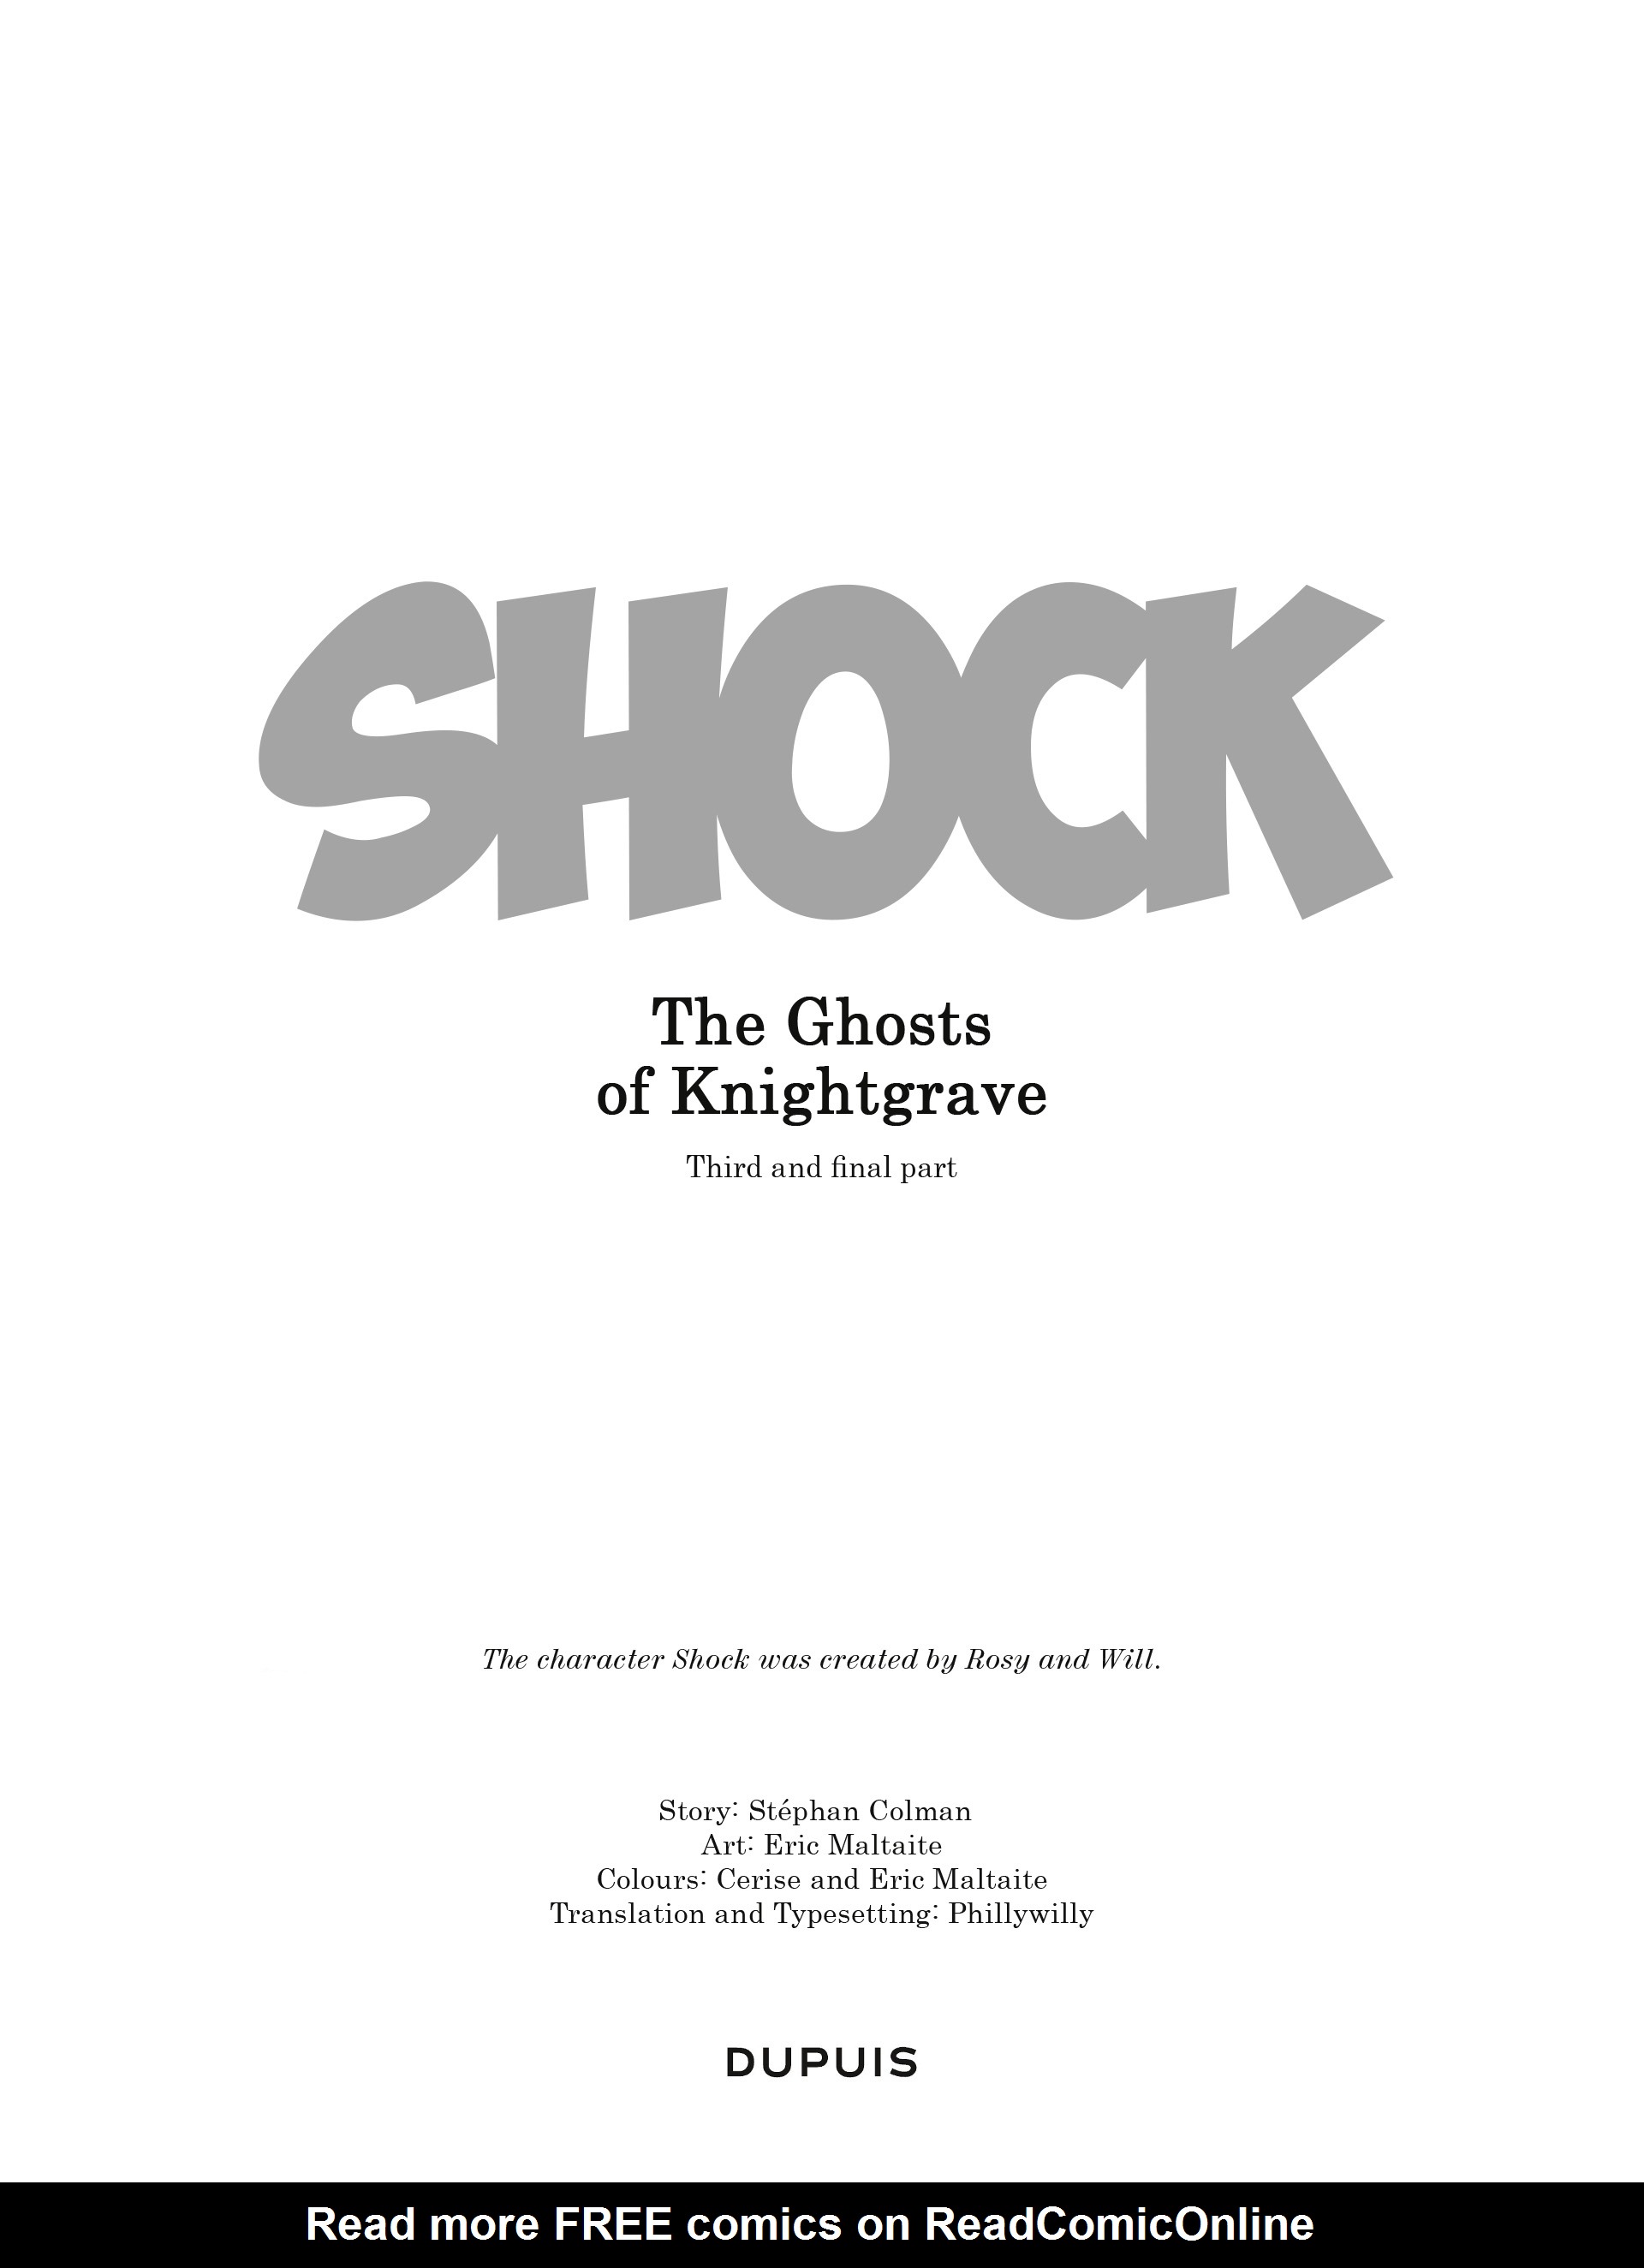 Read online Shock: The Ghosts of Knightgrave comic -  Issue # TPB 3 - 3